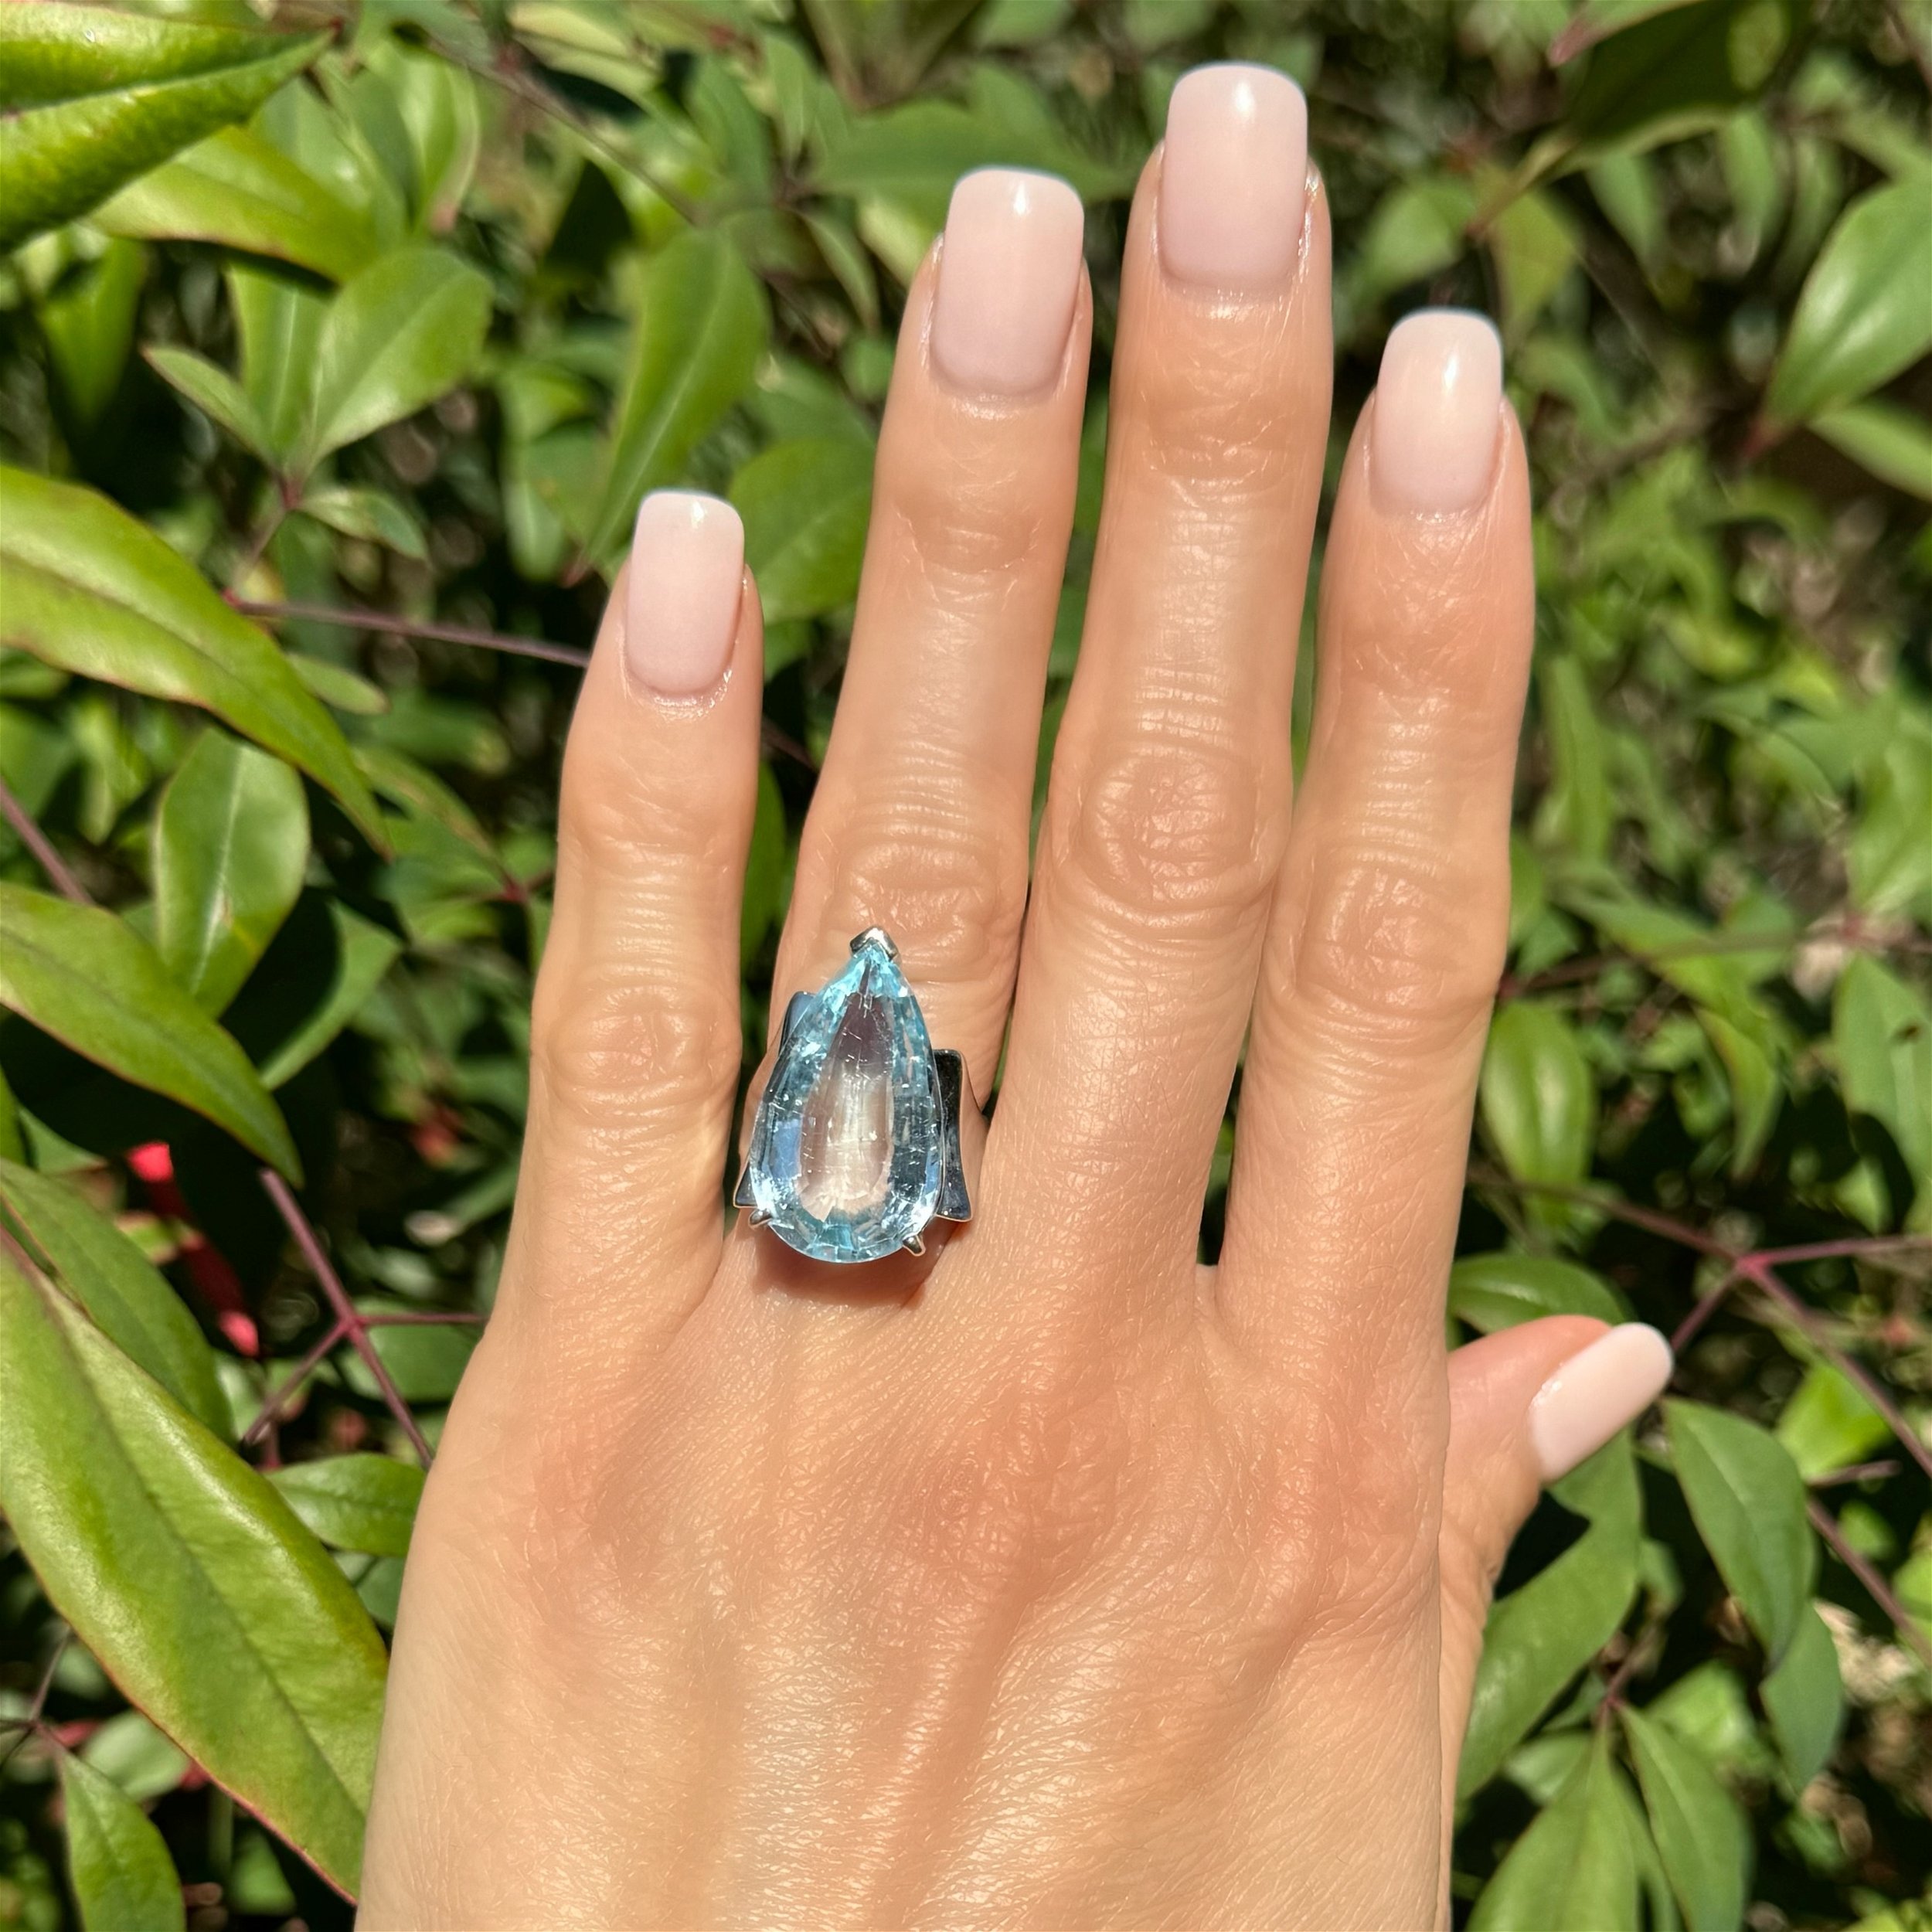 14K WG 20ct Pear Blue Topaz in Heavy Solitaire Wide Shank Ring 14.9g, s5.25